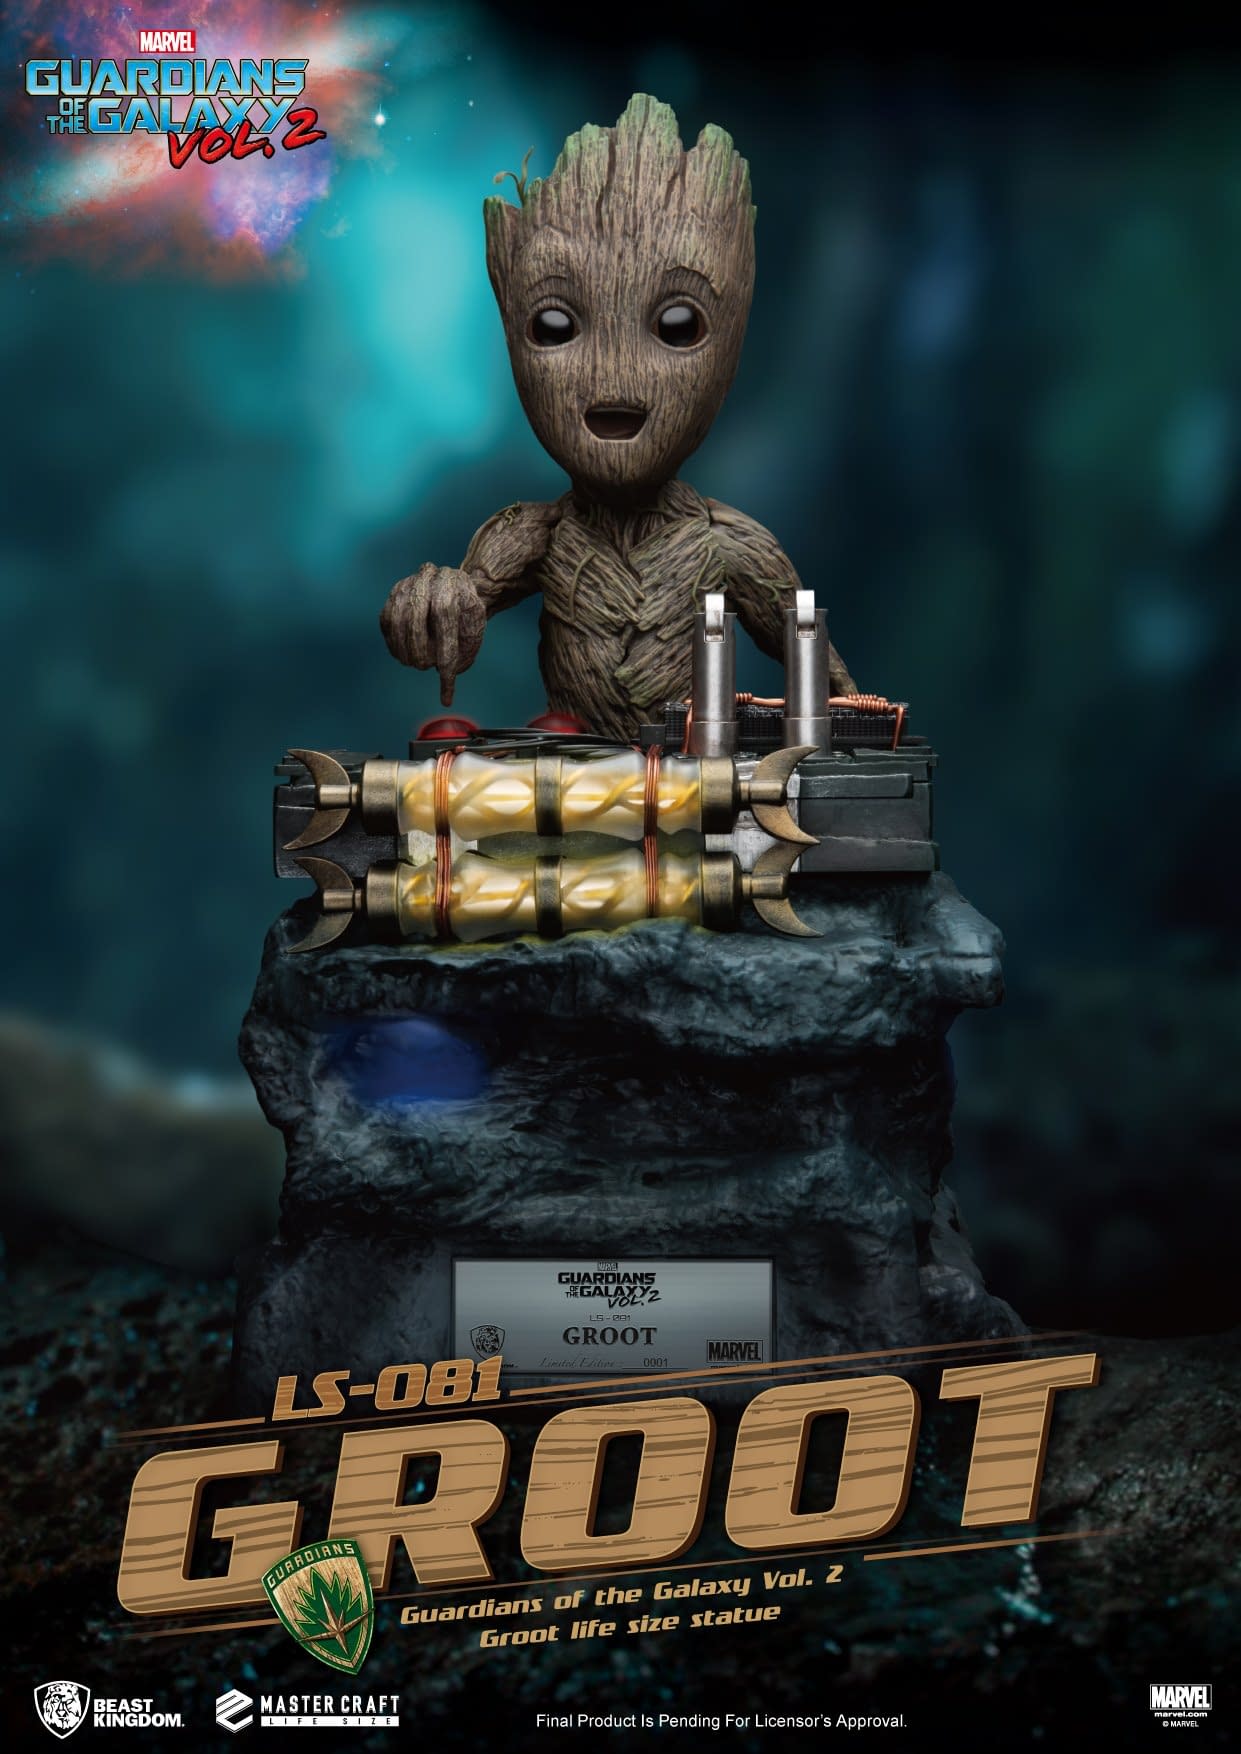 Guardians of the Galaxy Vol.2 Push Bomb Button Baby Groot Figure Statue Toy 